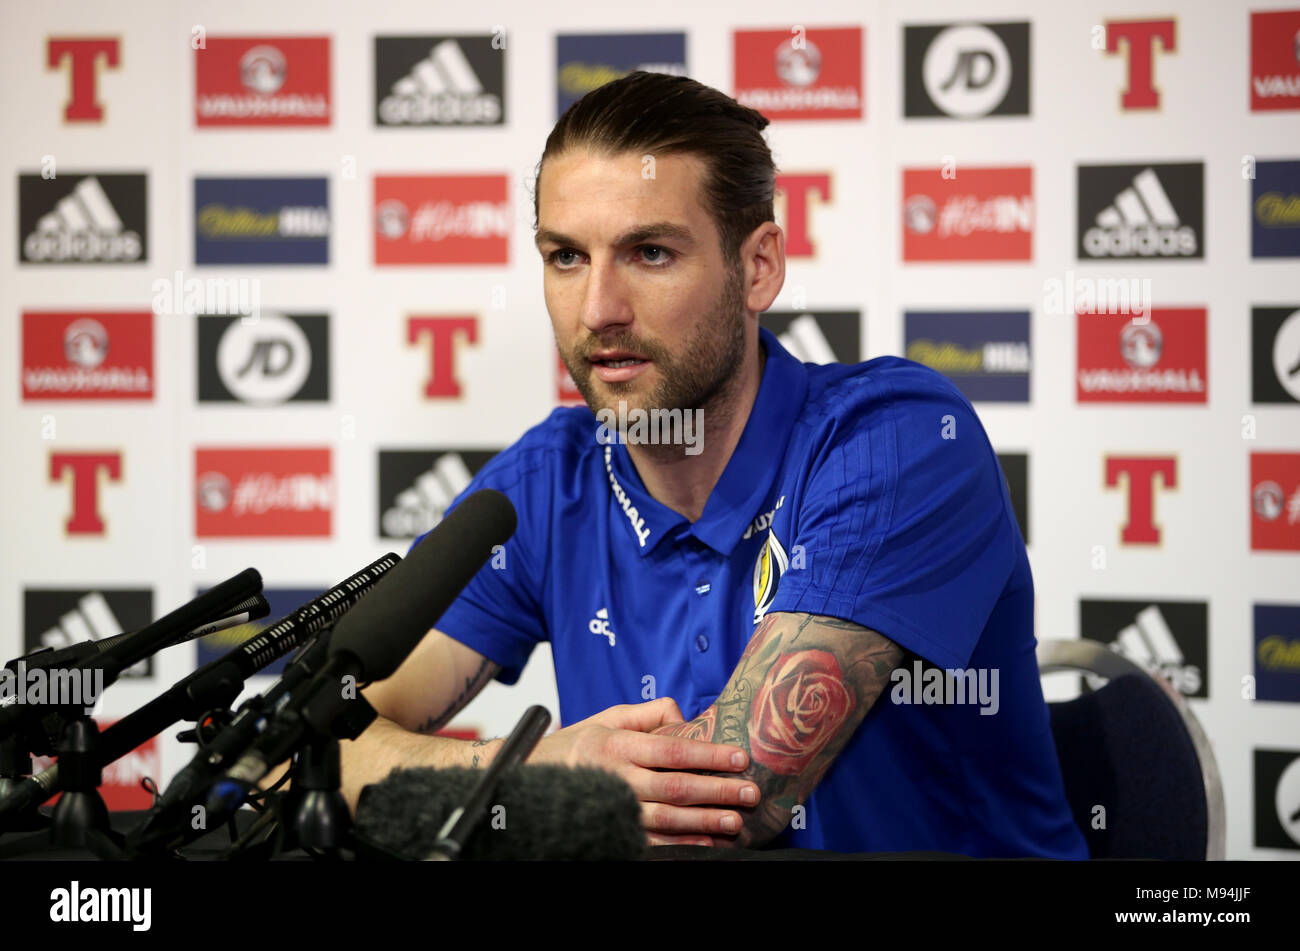 Scotland's Charlie Mulgrew during a Press Conference at Hampden Park, Glasgow. PRESS ASSOCIATION Photo. Picture date: Thursday March 22, 2018. See PA story SOCCER Scotland. Photo credit should read: Jane Barlow/PA Wire. Stock Photo